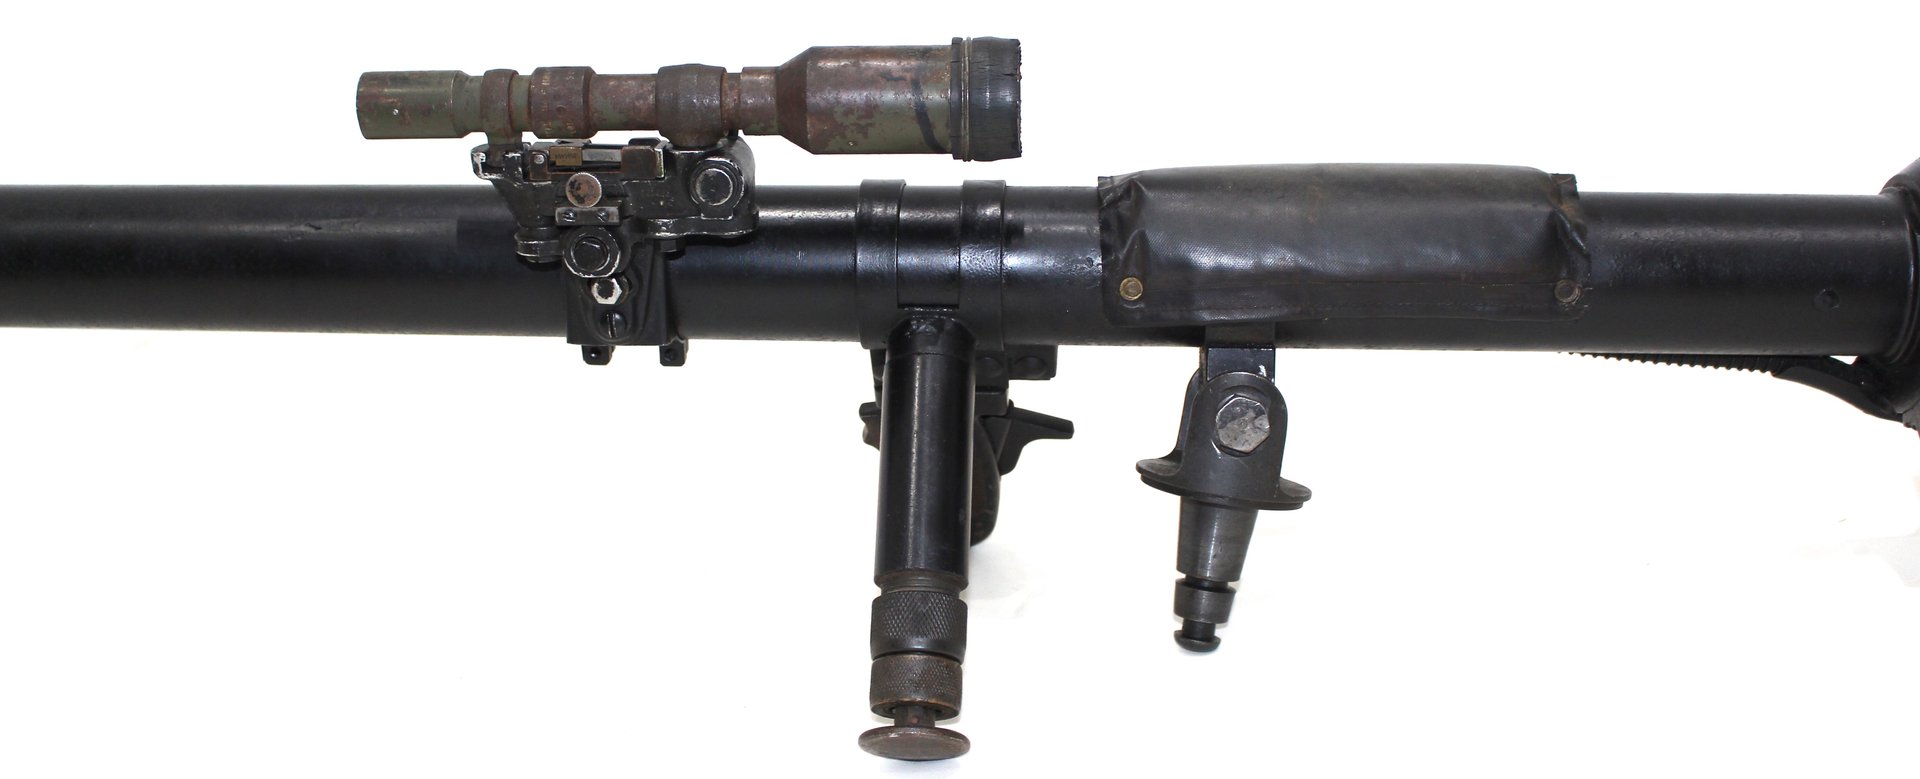 M18 57mm Recoilless Rifle #20